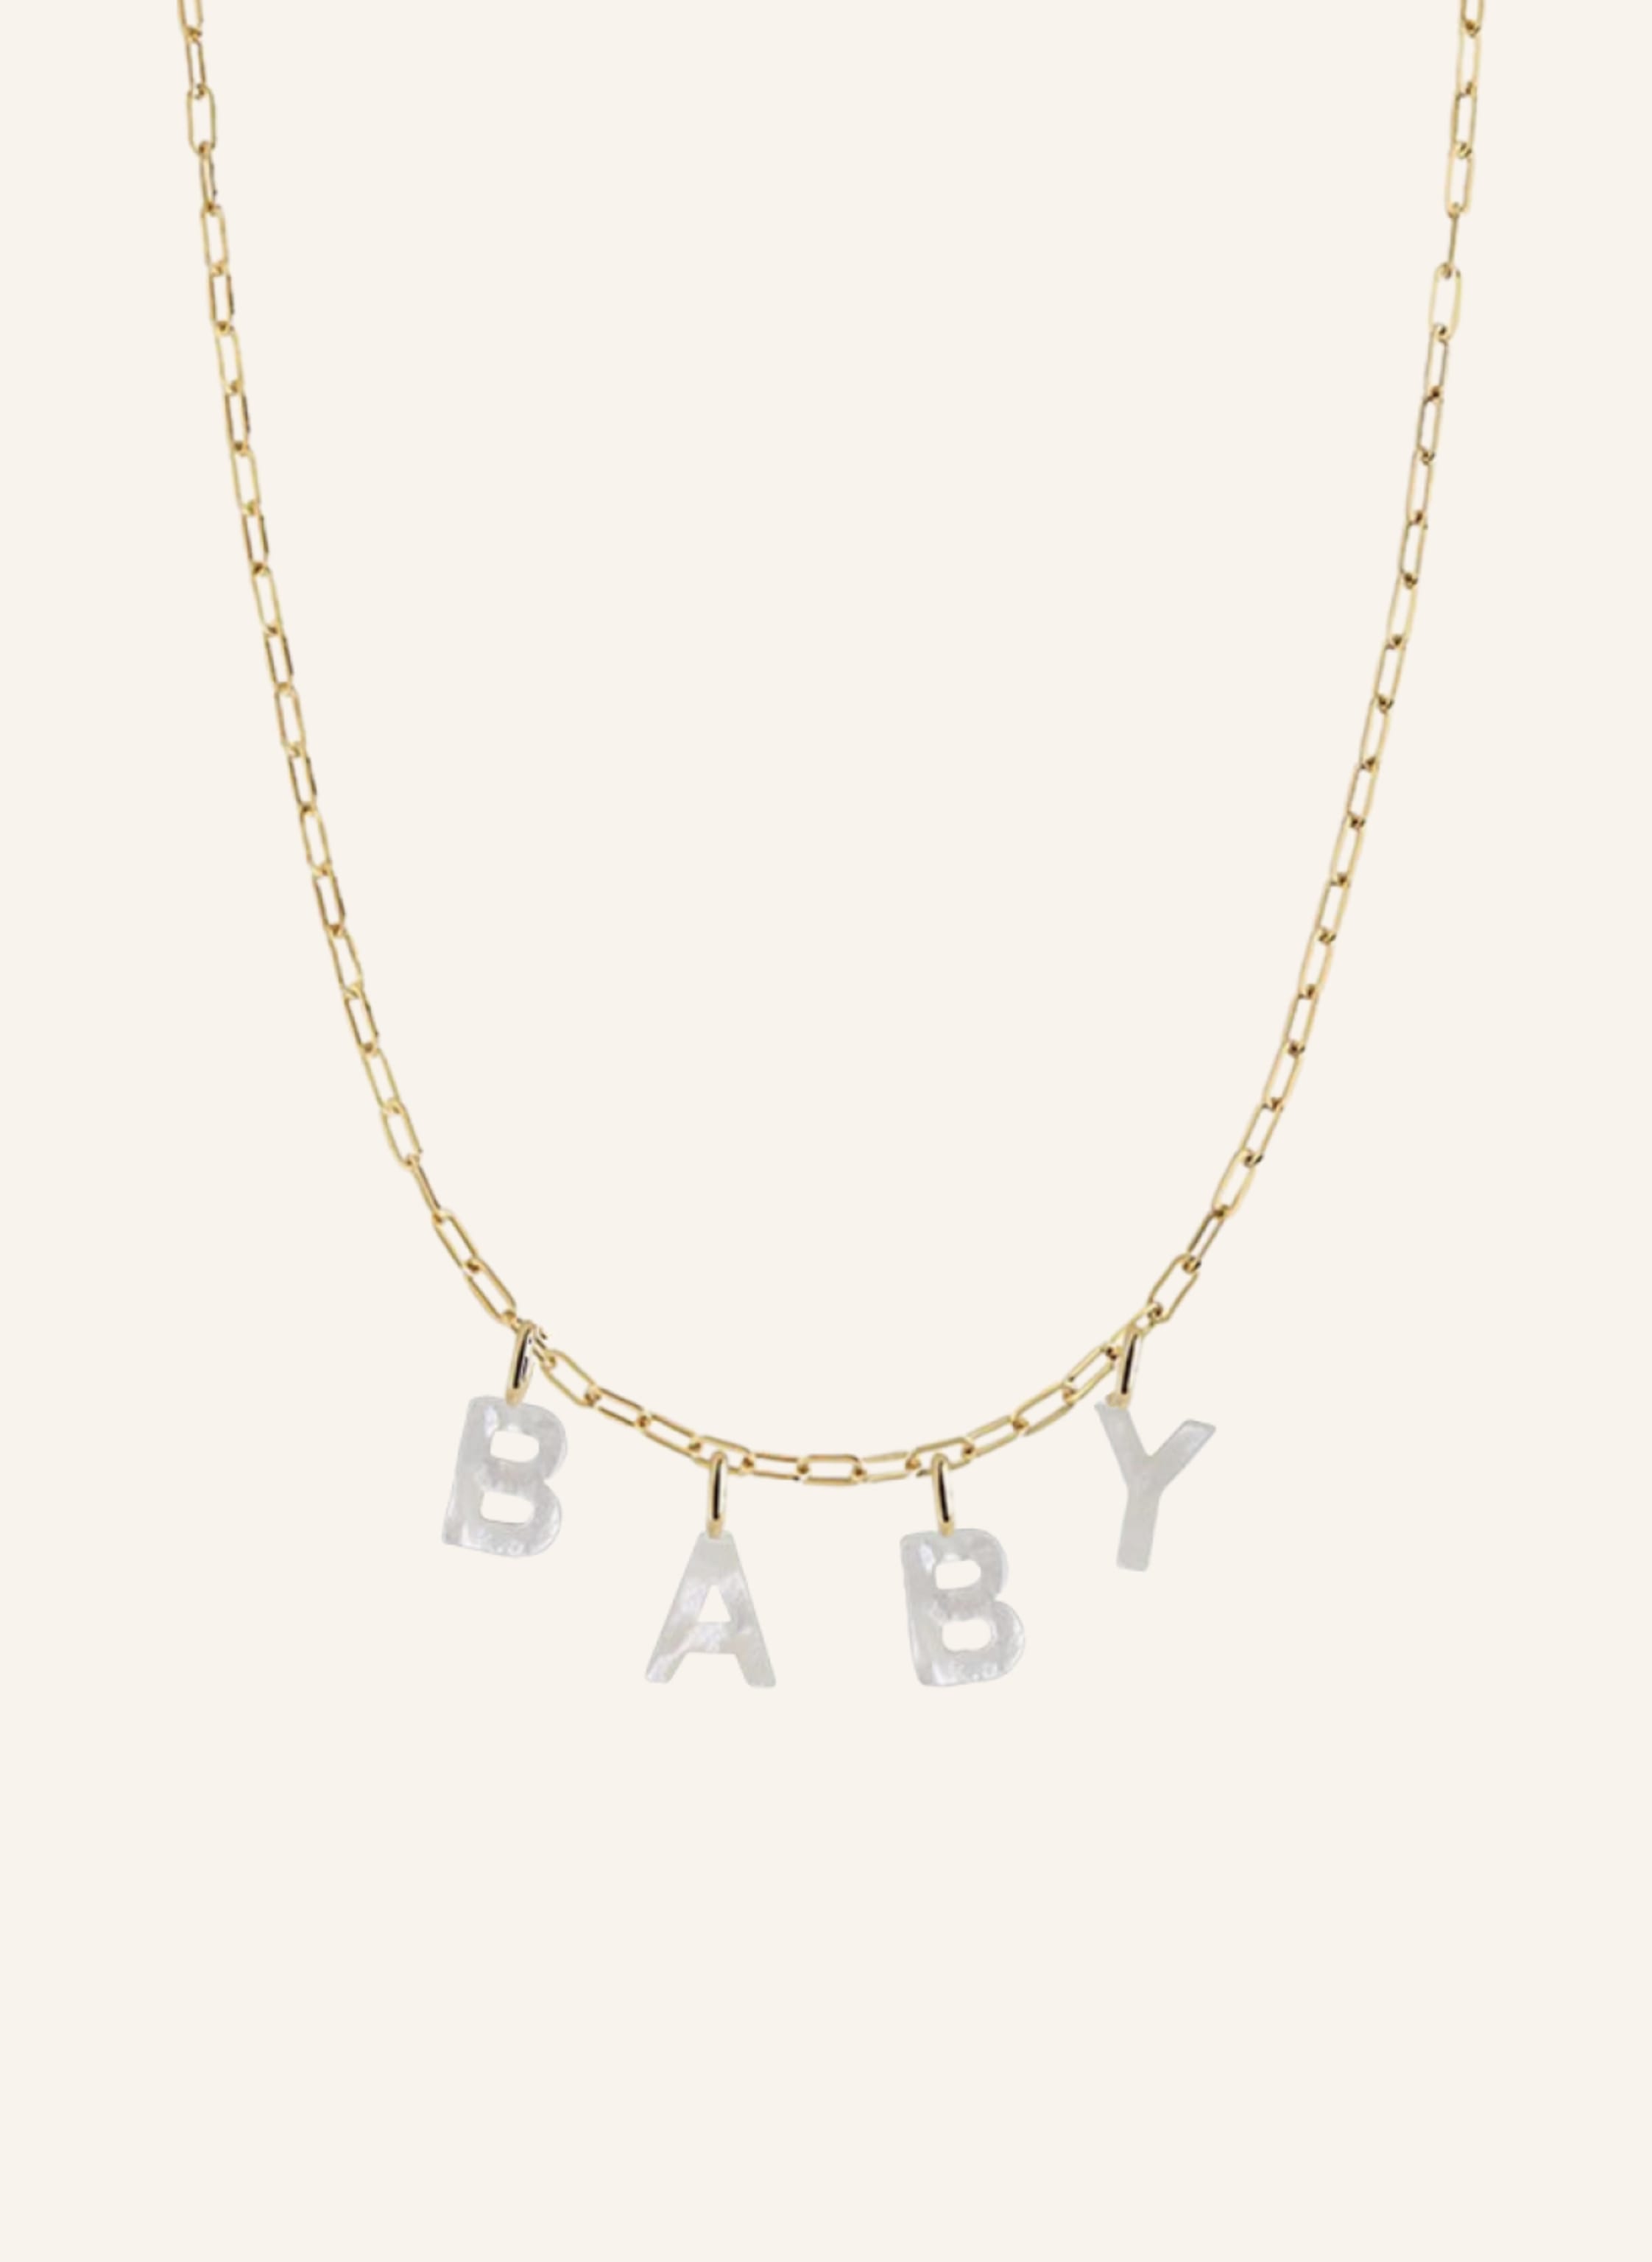 Maria Black Kette Baby Necklace By Glambou gold